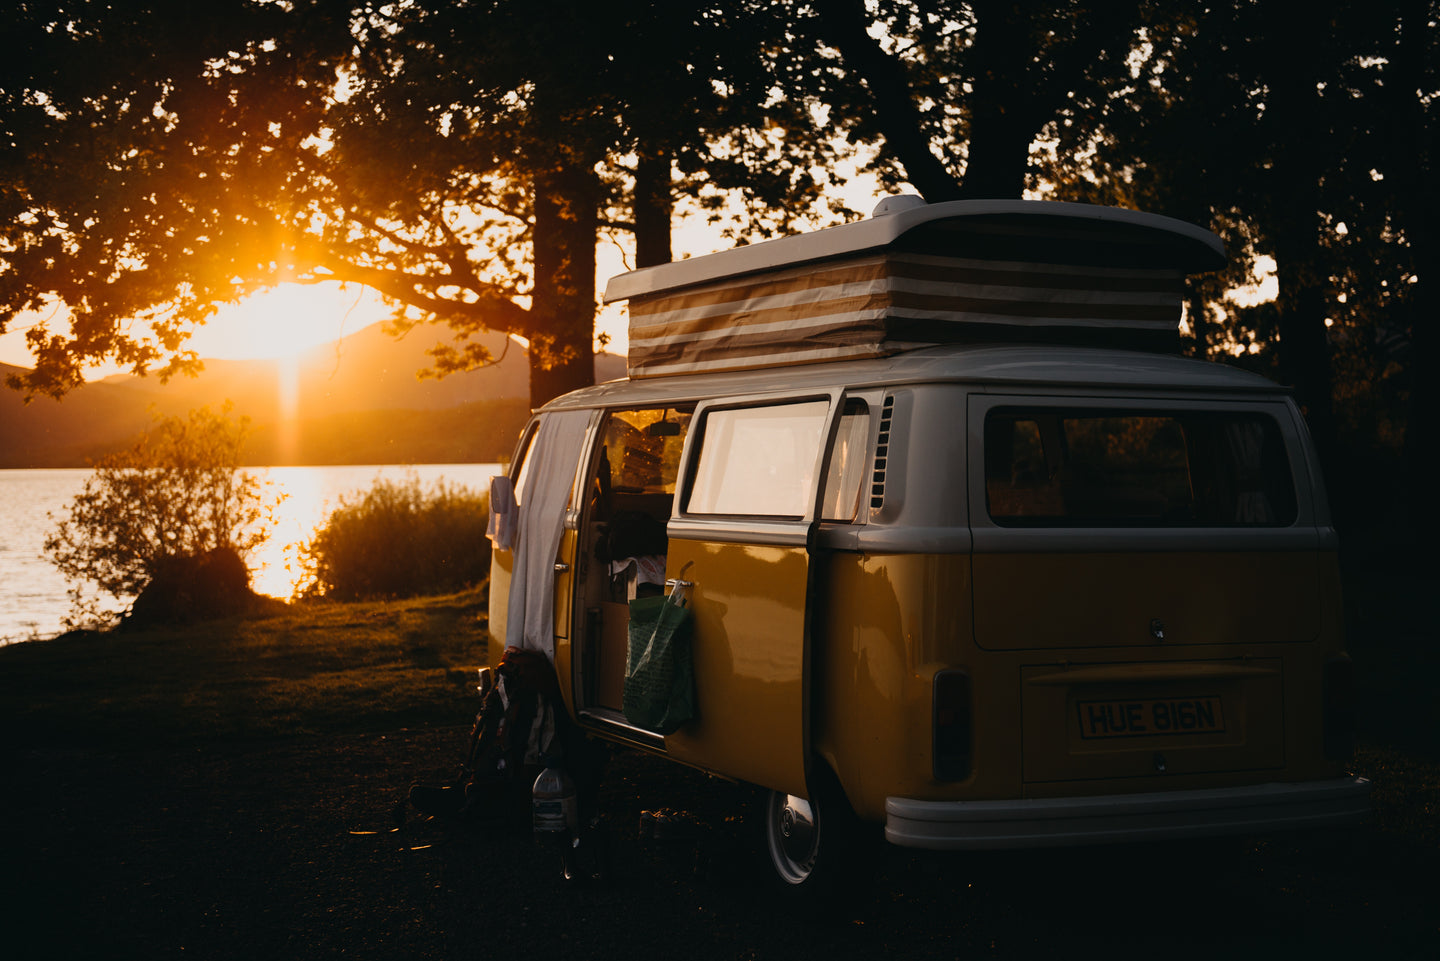 What You Can Learn from the #VANLIFE Movement